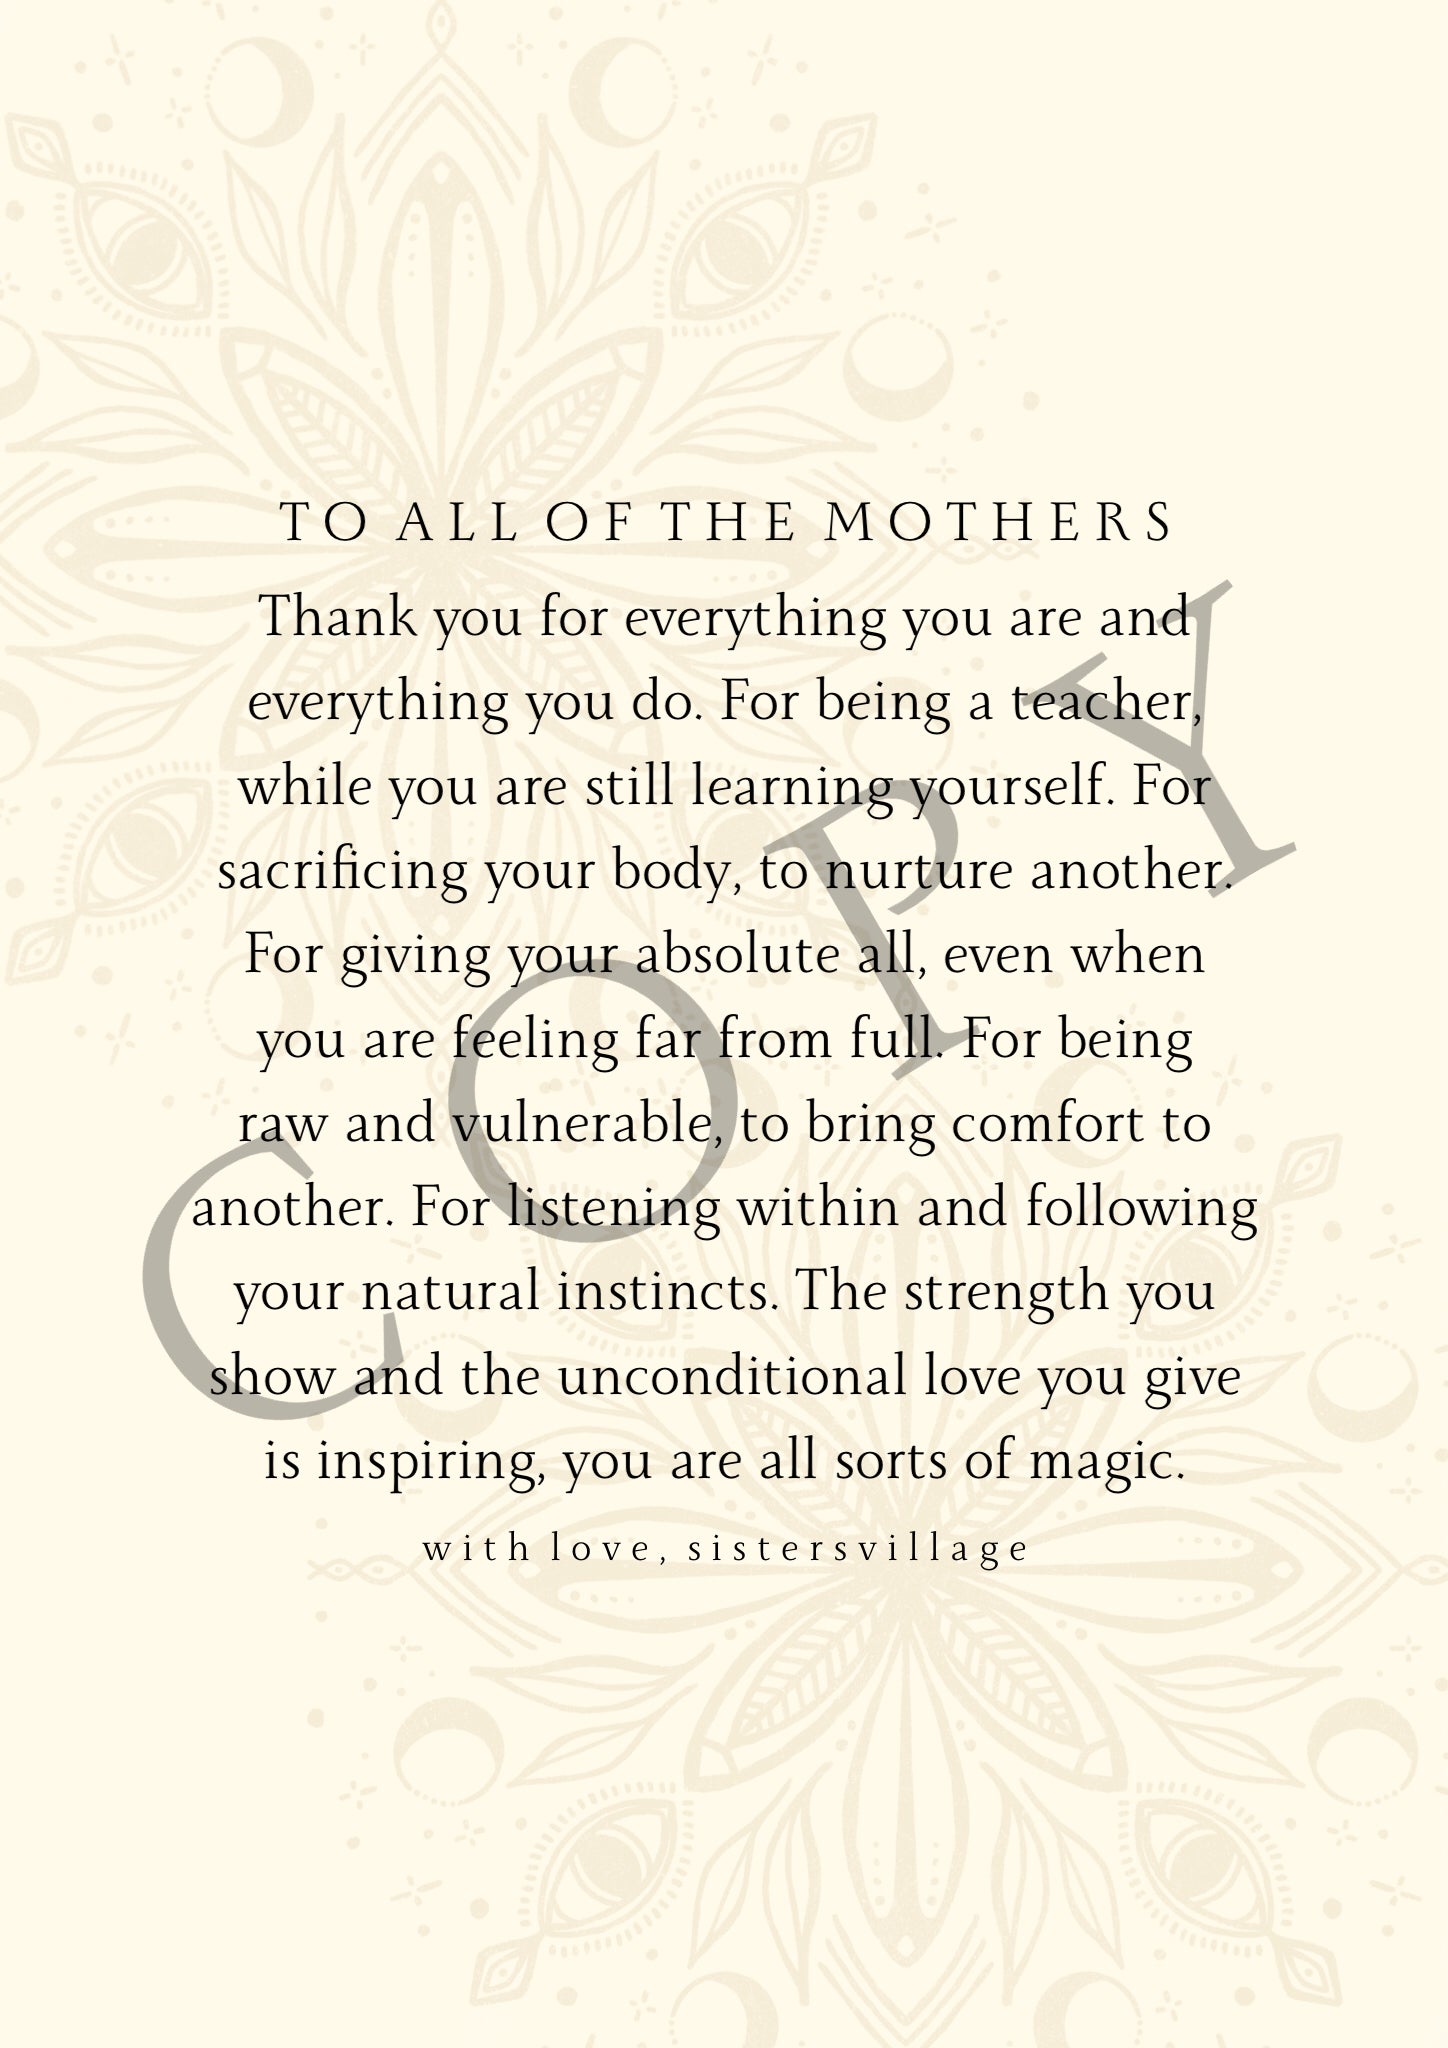 TO ALL OF THE MOTHERS DIGITAL PRINT